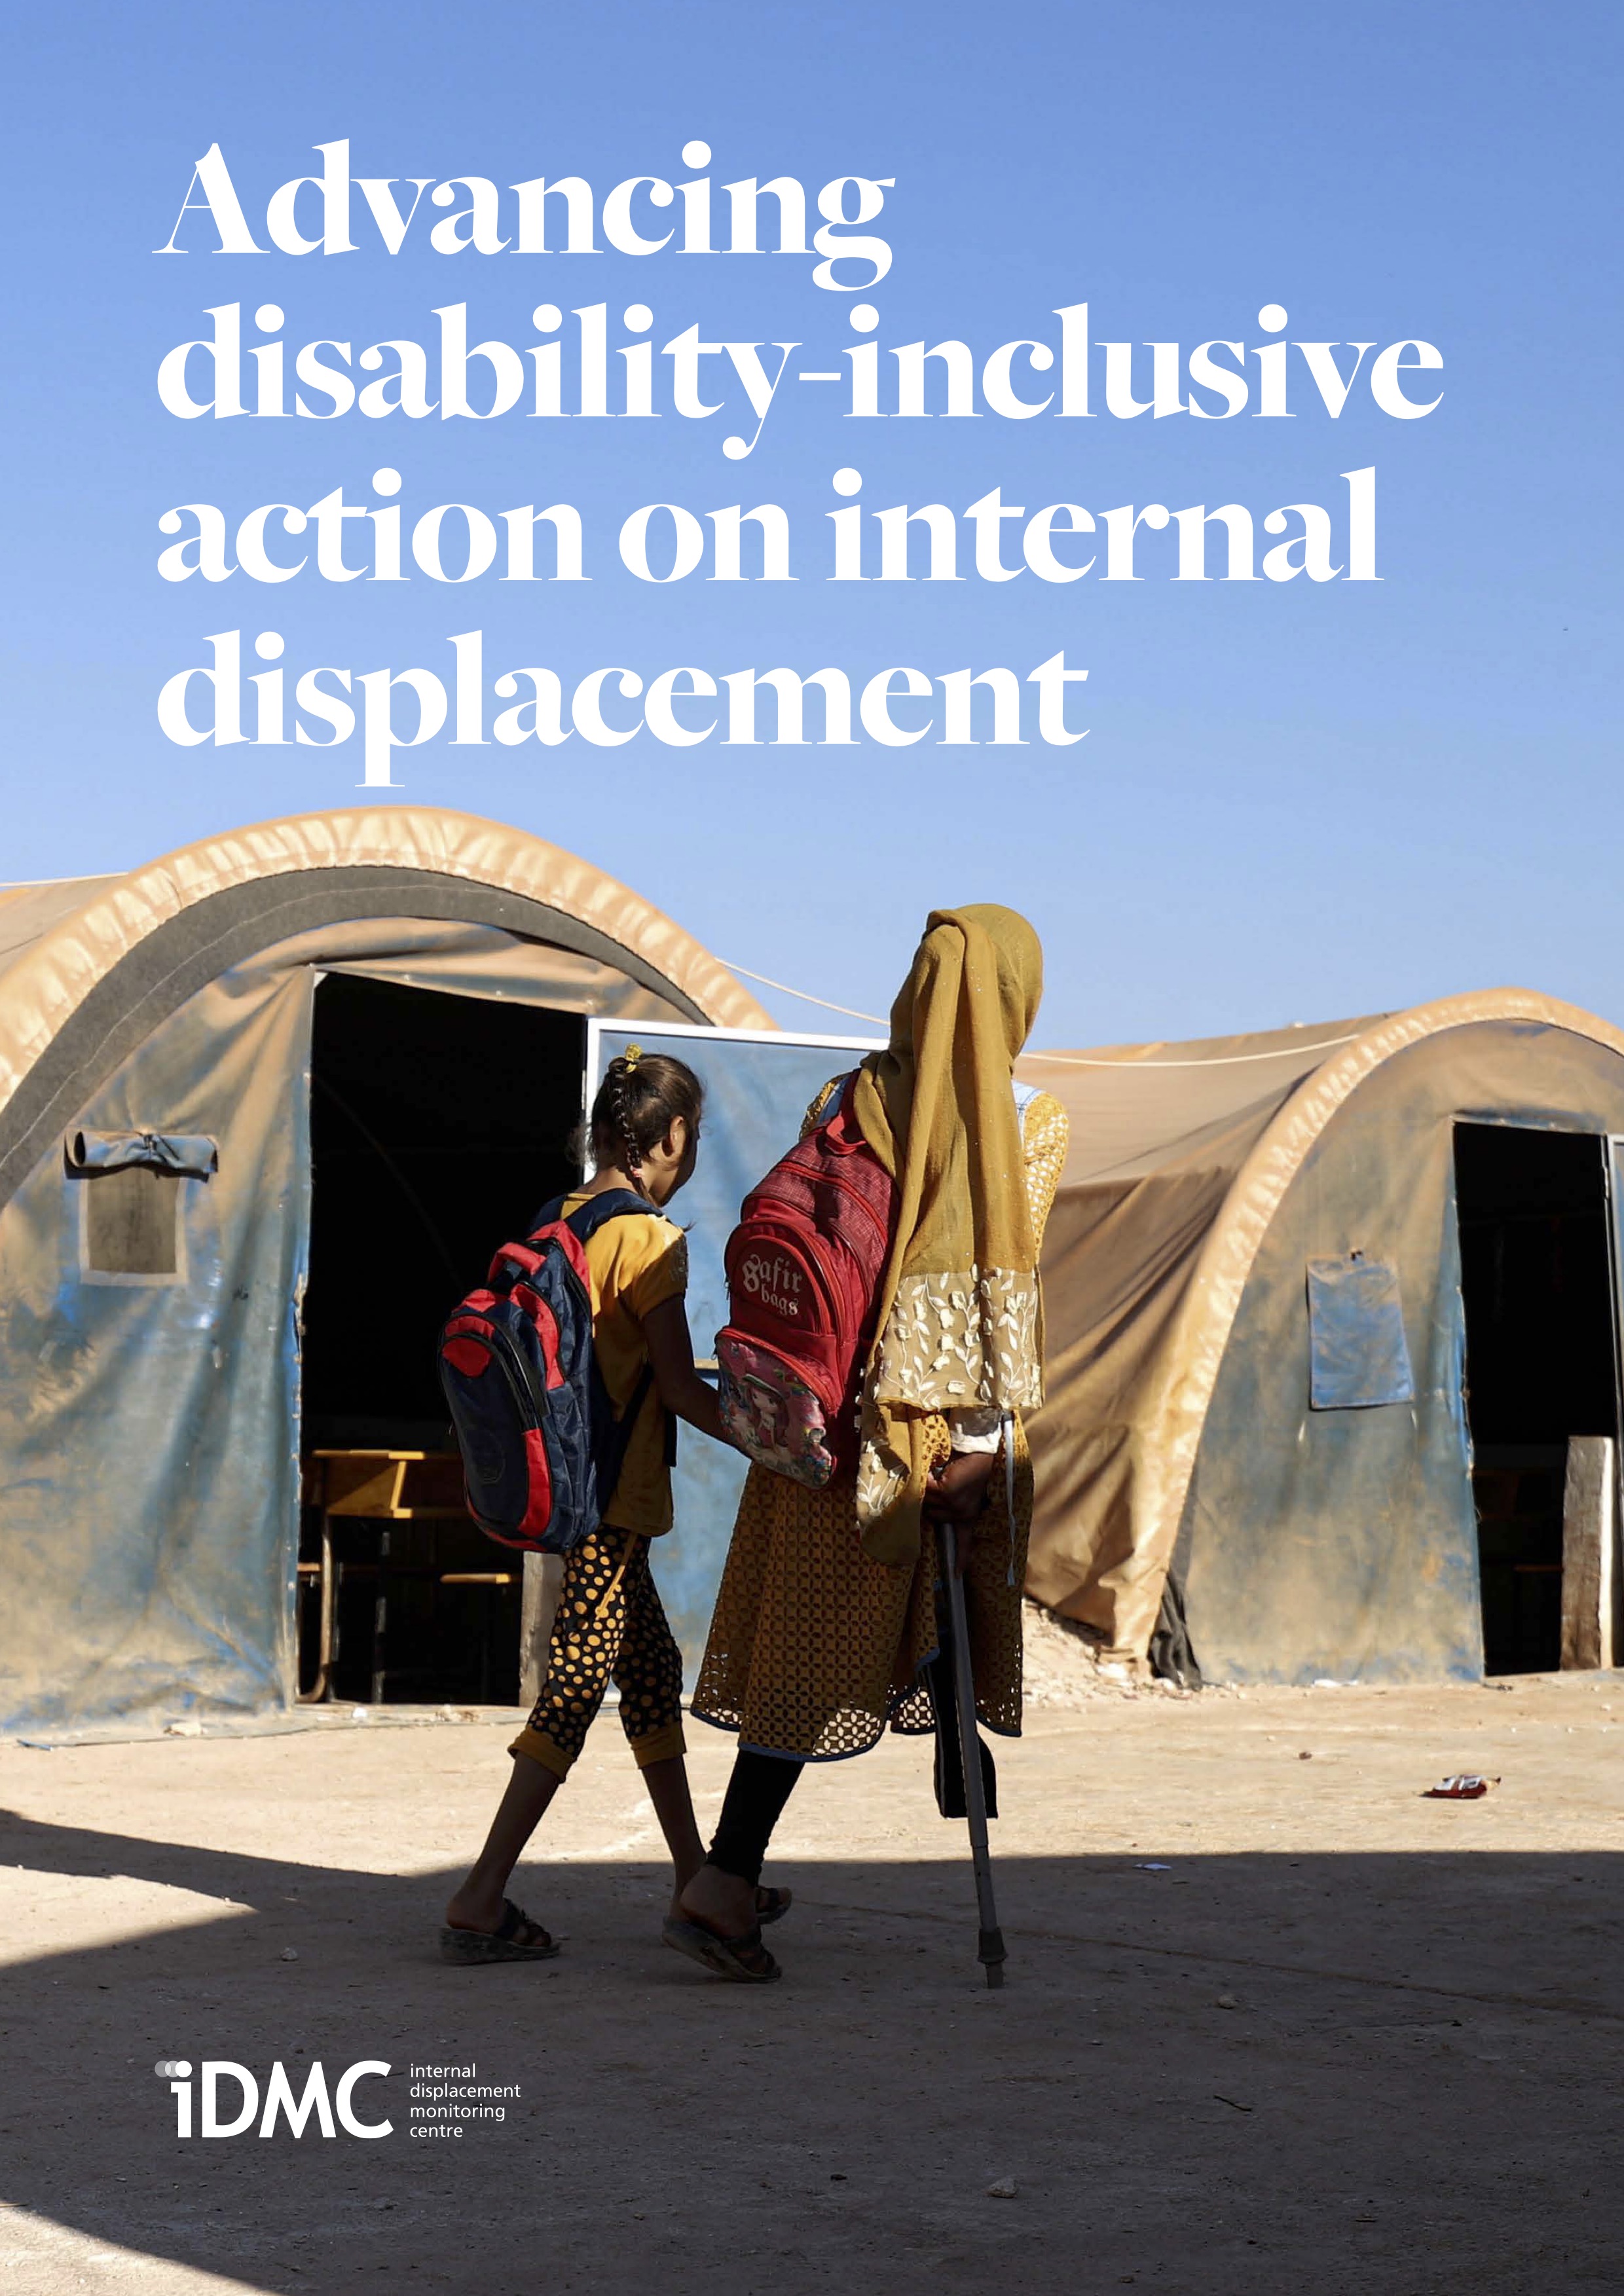 Advancing disability-inclusive action on internal displacement